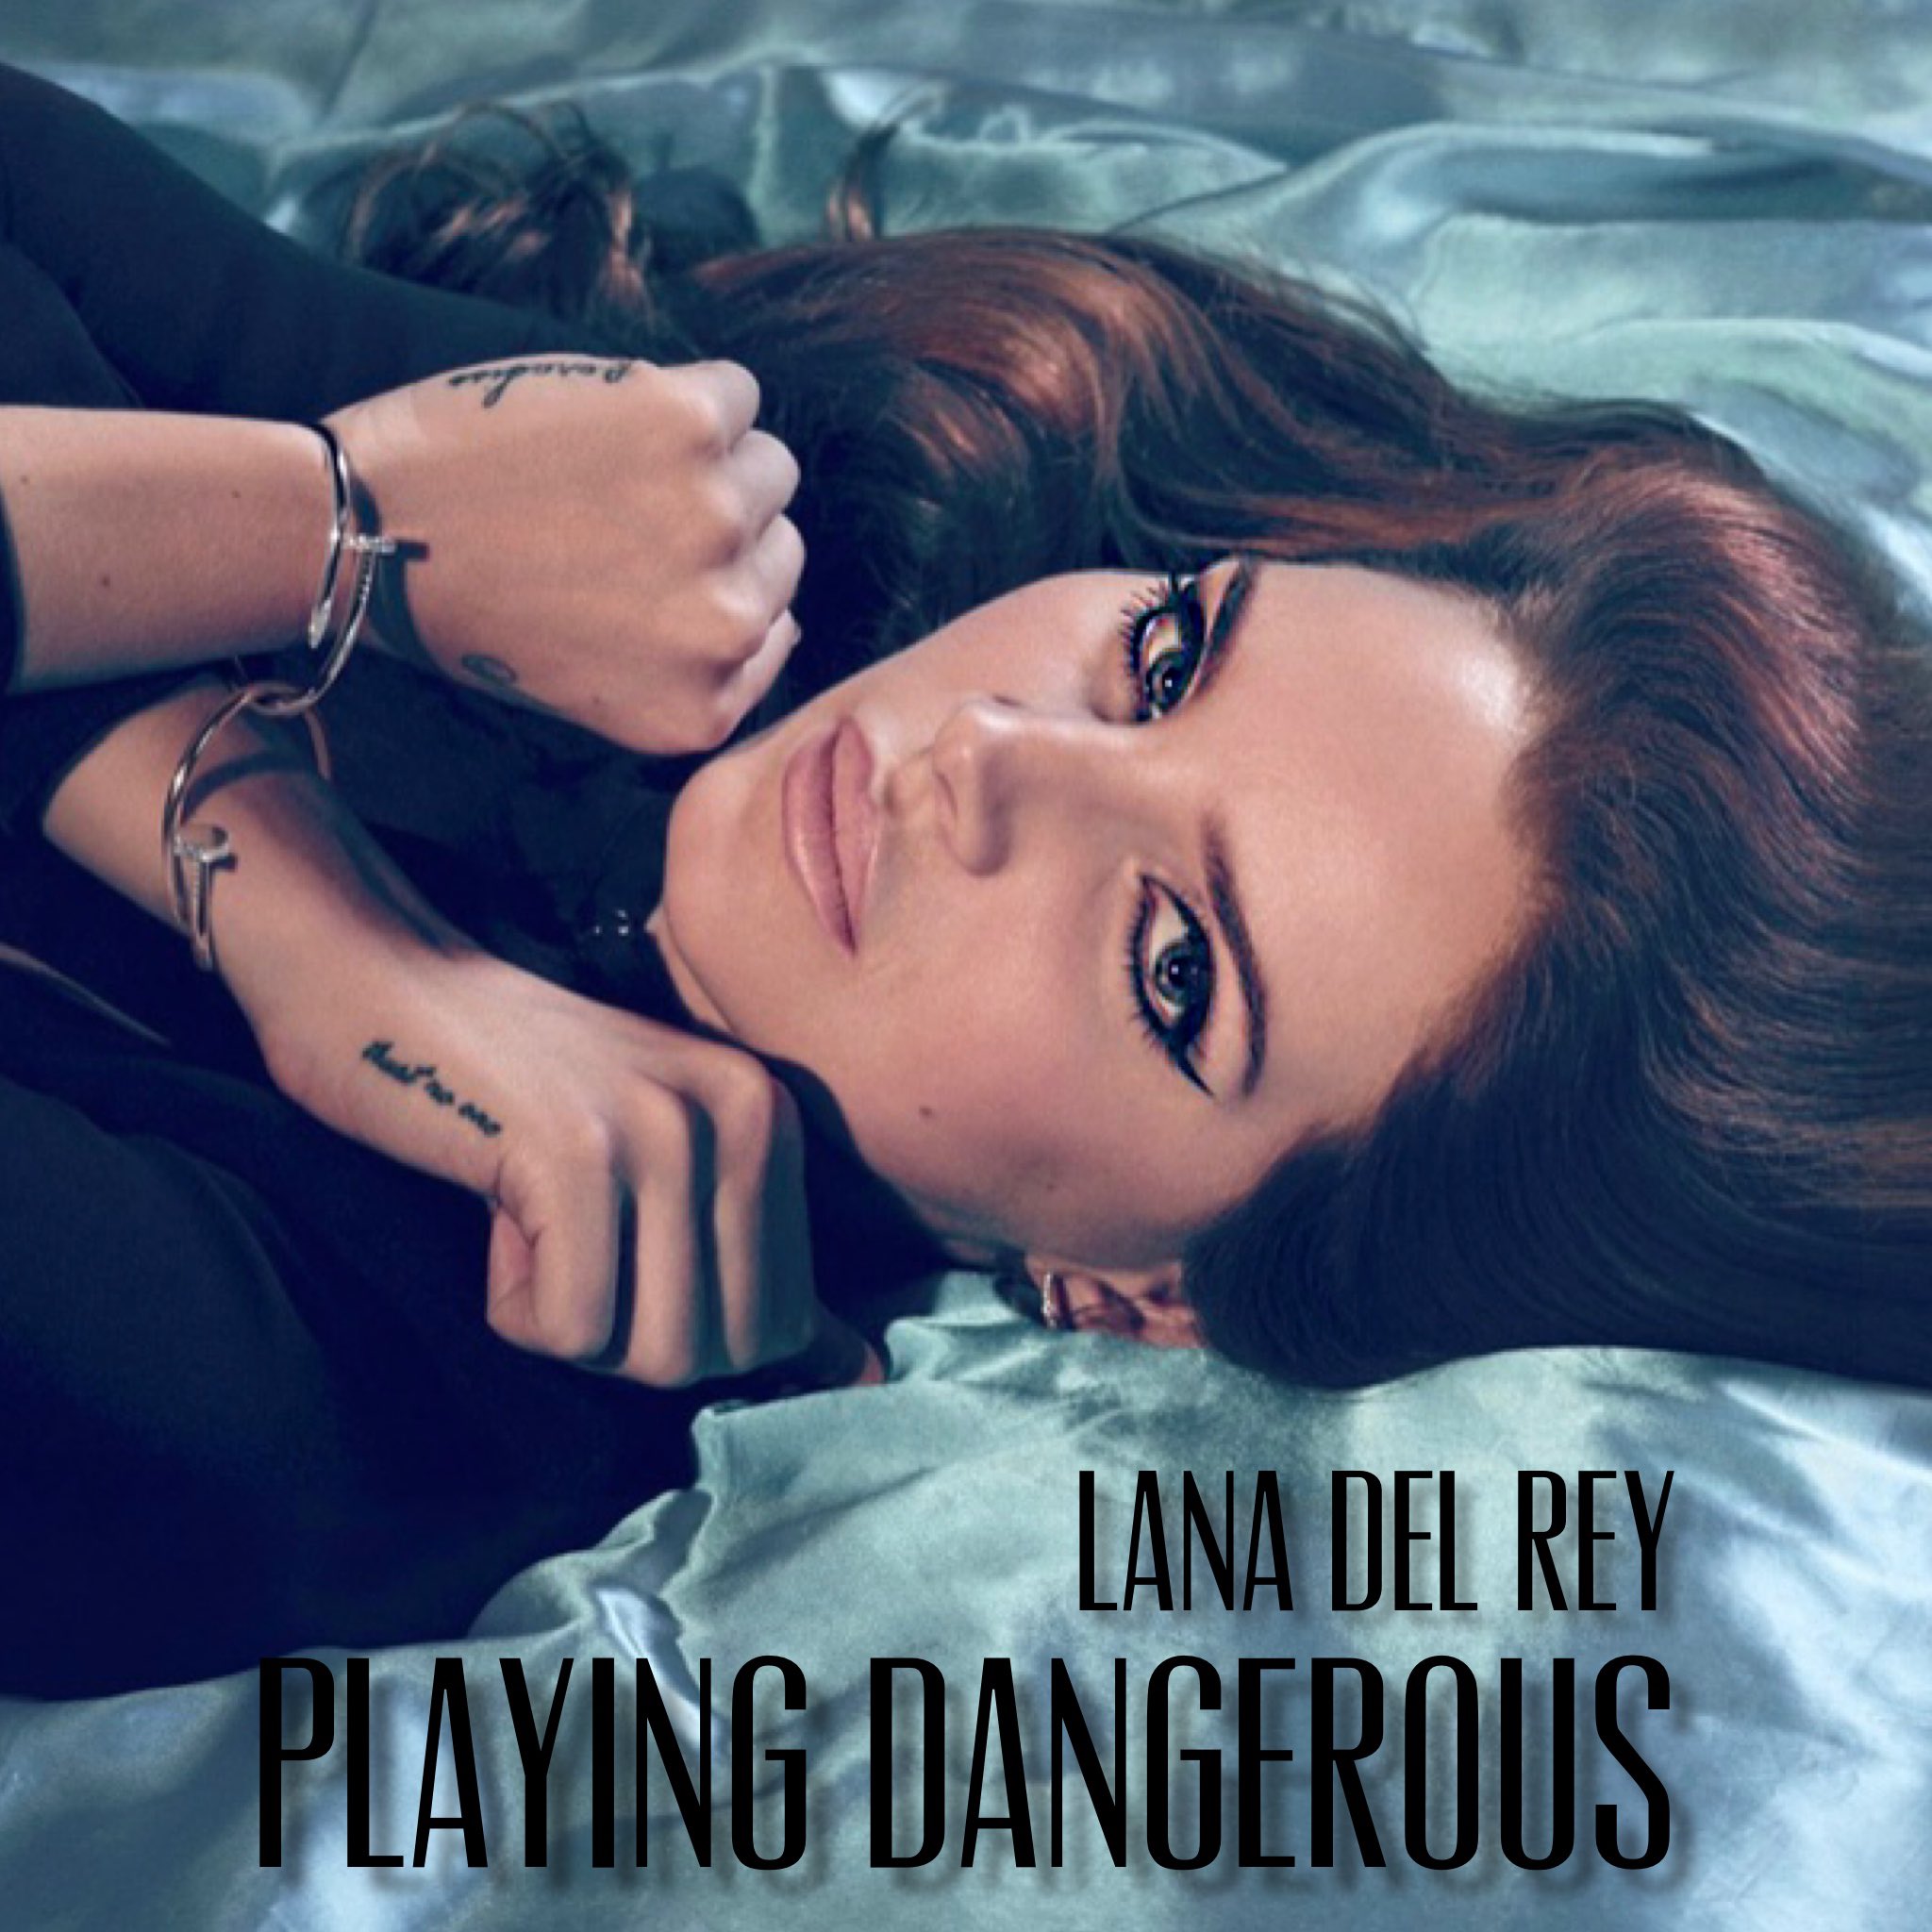 marquis on X: Lana Del Rey's 'Playing Dangerous' is one of my favorite  unreleased LDR songs, but no stan ever talks about it! What're your  thoughts?! I think it's an underrated sex